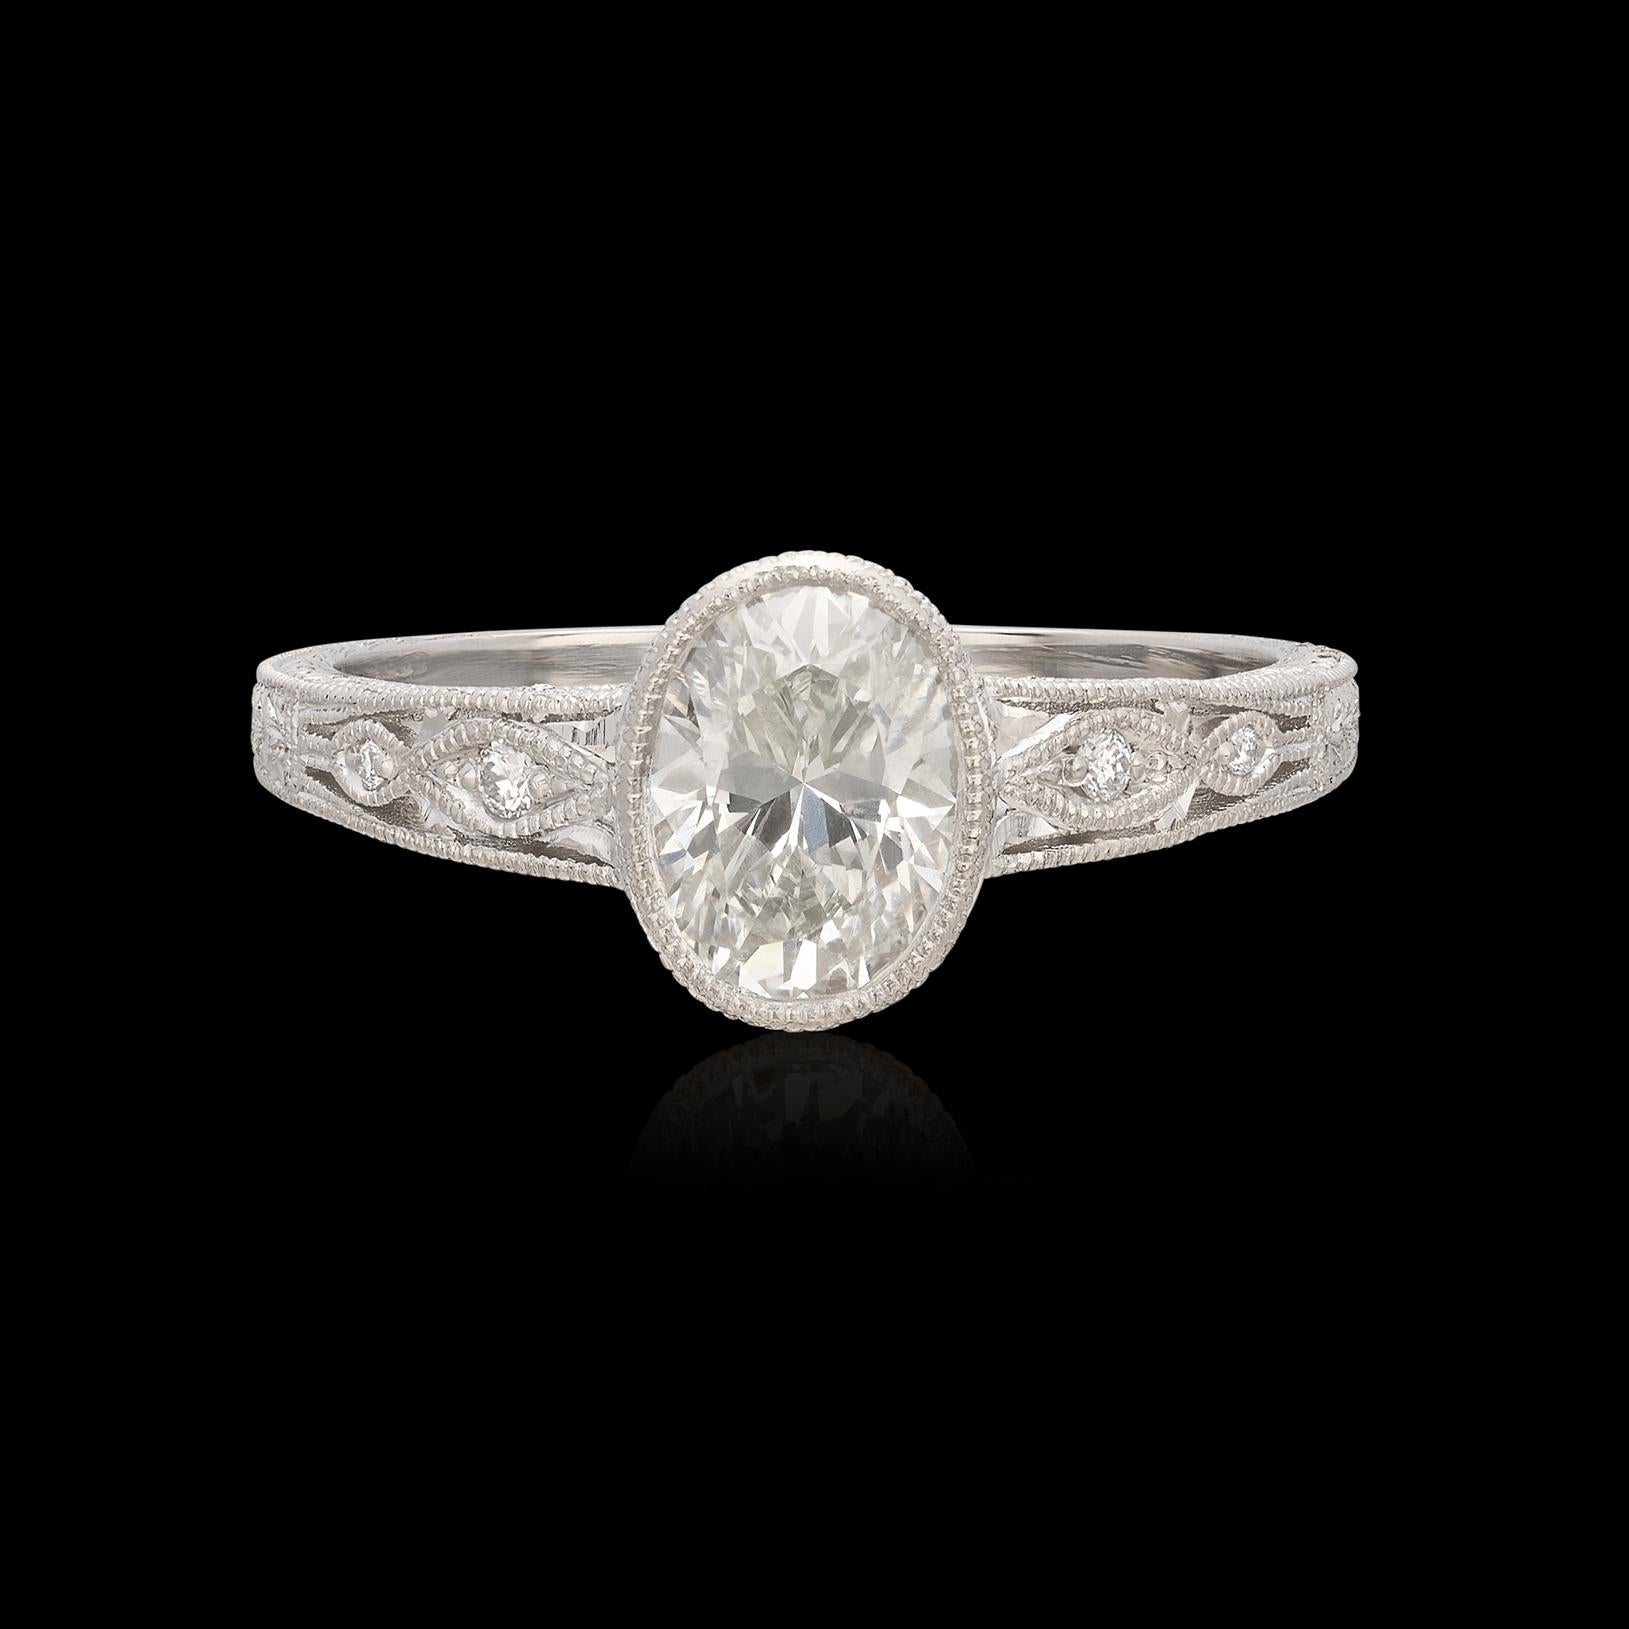 Gorgeous custom Platinum ring features a 0.90 carat oval diamond bezel set in a delicate design featuring expert milgrain, filigree and hand engraving. The center stone has been graded as H color and VS clarity, delivering plenty sparkle and fire.